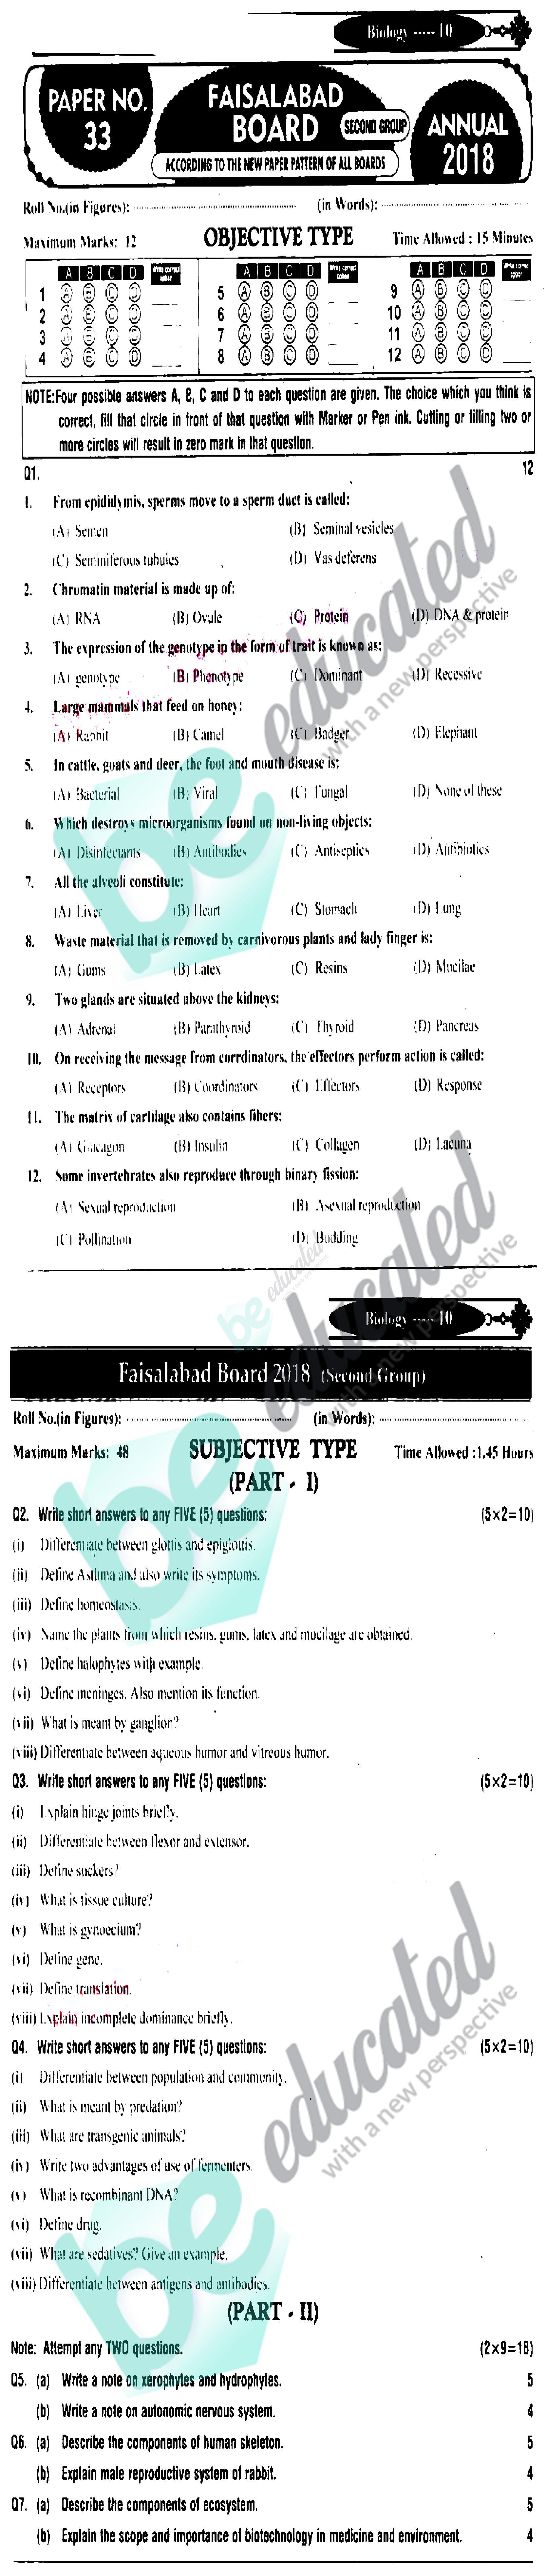 10th Class Biology Past Papers 10th English Medium BISE Faisalabad